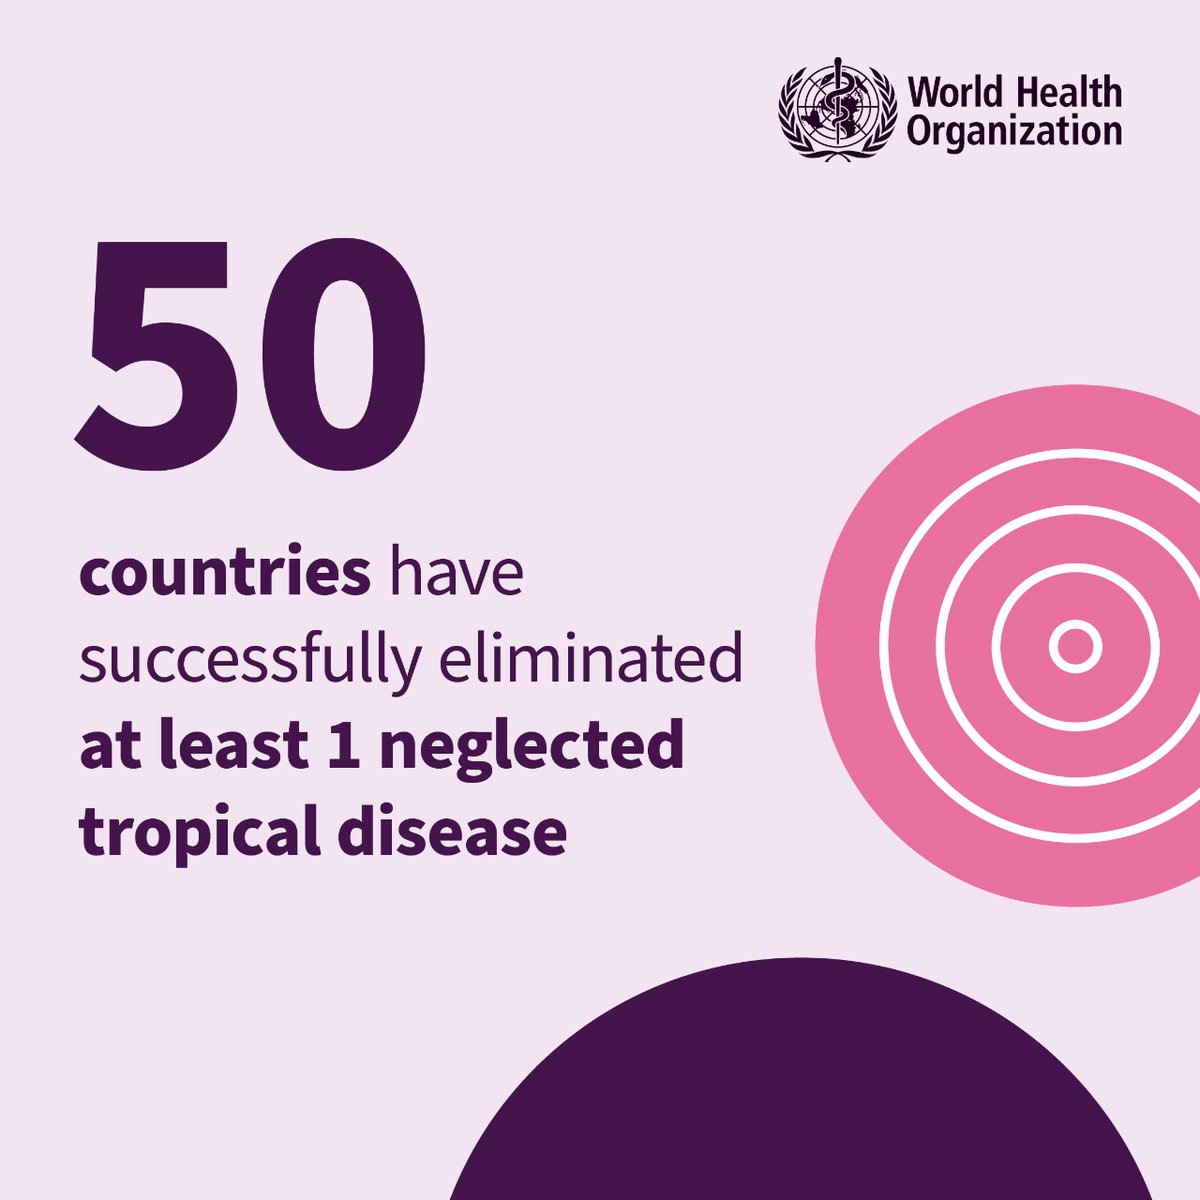 NTDs are not rare. They affect over a billion people worldwide. They compound suffering and poverty.

The good news? They are almost all preventable and 50 countries have successfully eliminated at least one NTD.

Join us to #BeatNTDs now ✅

#WorldNTDDay #UnitedAgainstRabies